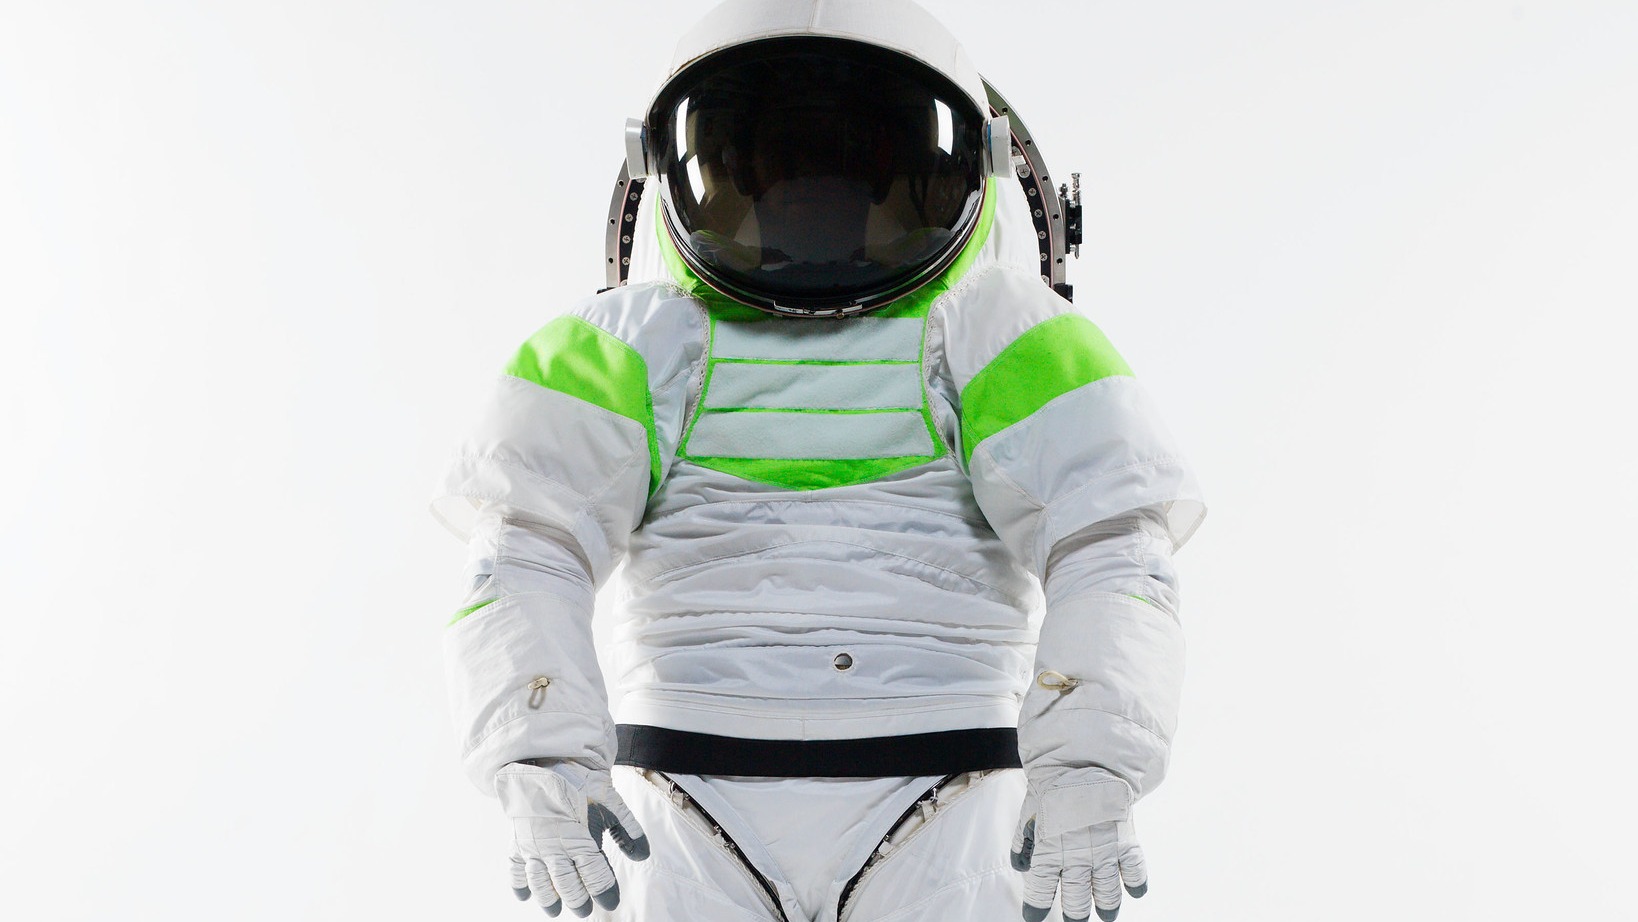 buzz lightyear space suit for mars